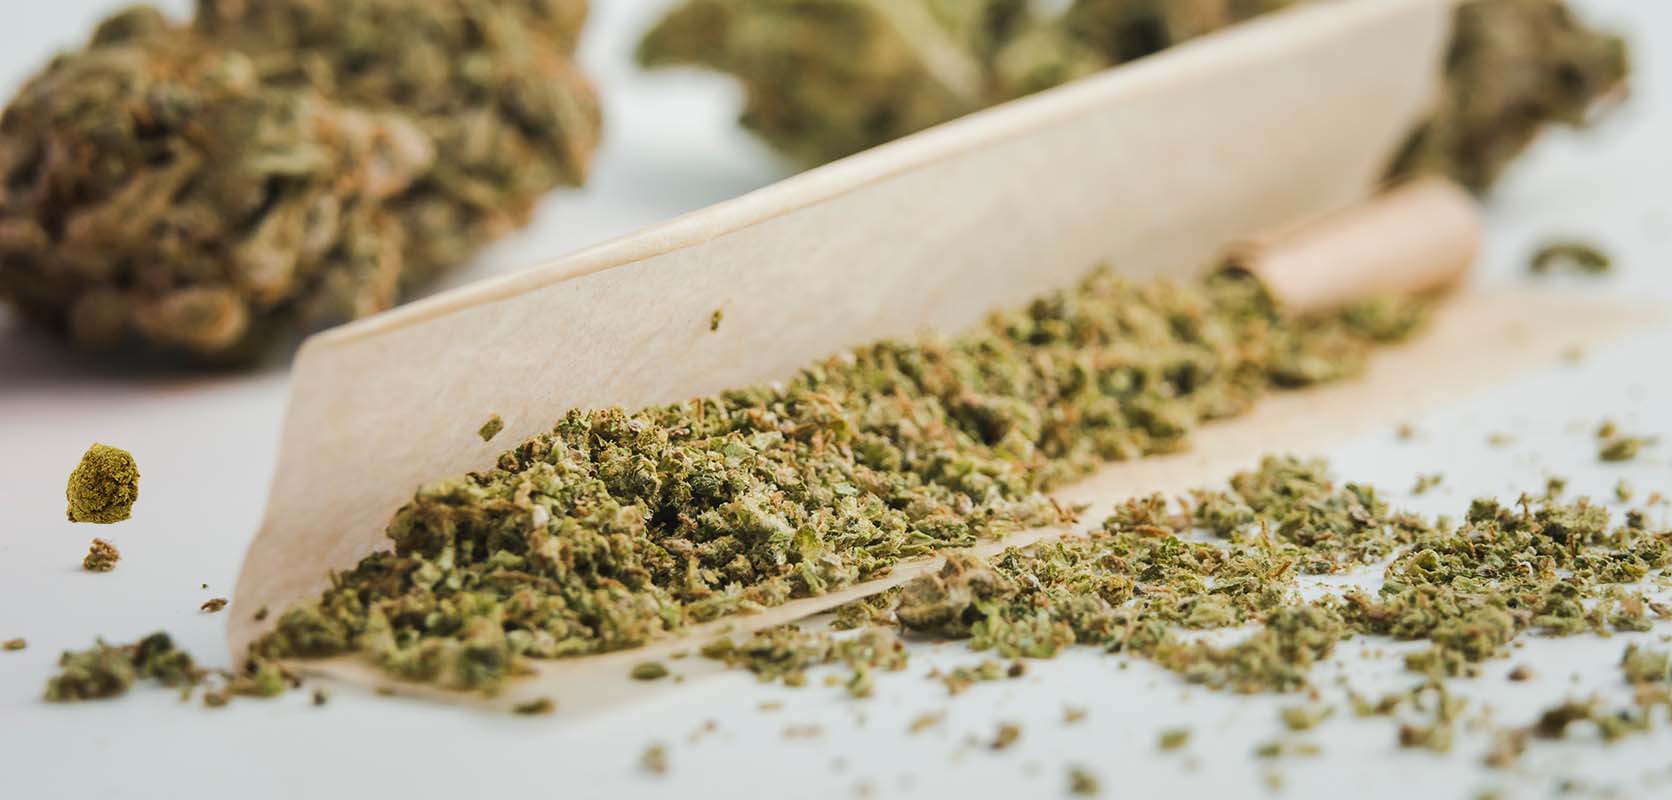 image of weed in a joint ready to be rolled and smoked. where to buy weed online in canada.